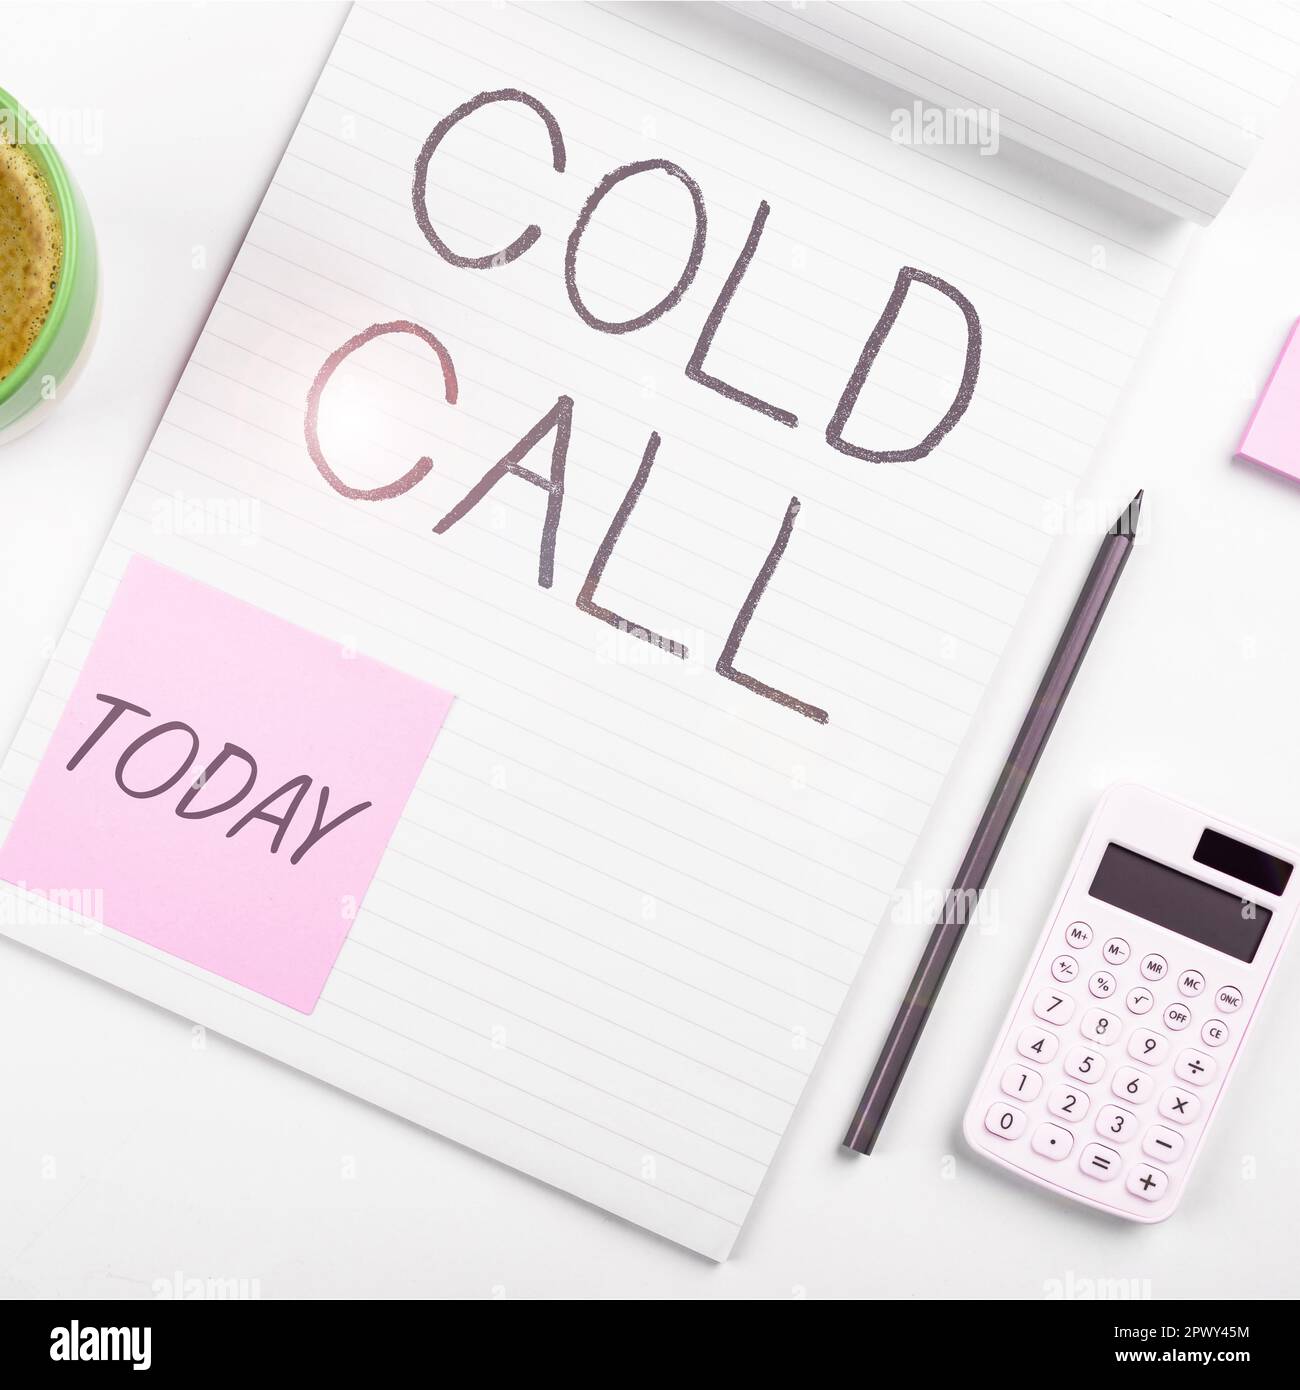 Text showing inspiration Cold Call, Business concept Unsolicited call made by someone trying to sell goods or services Stock Photo